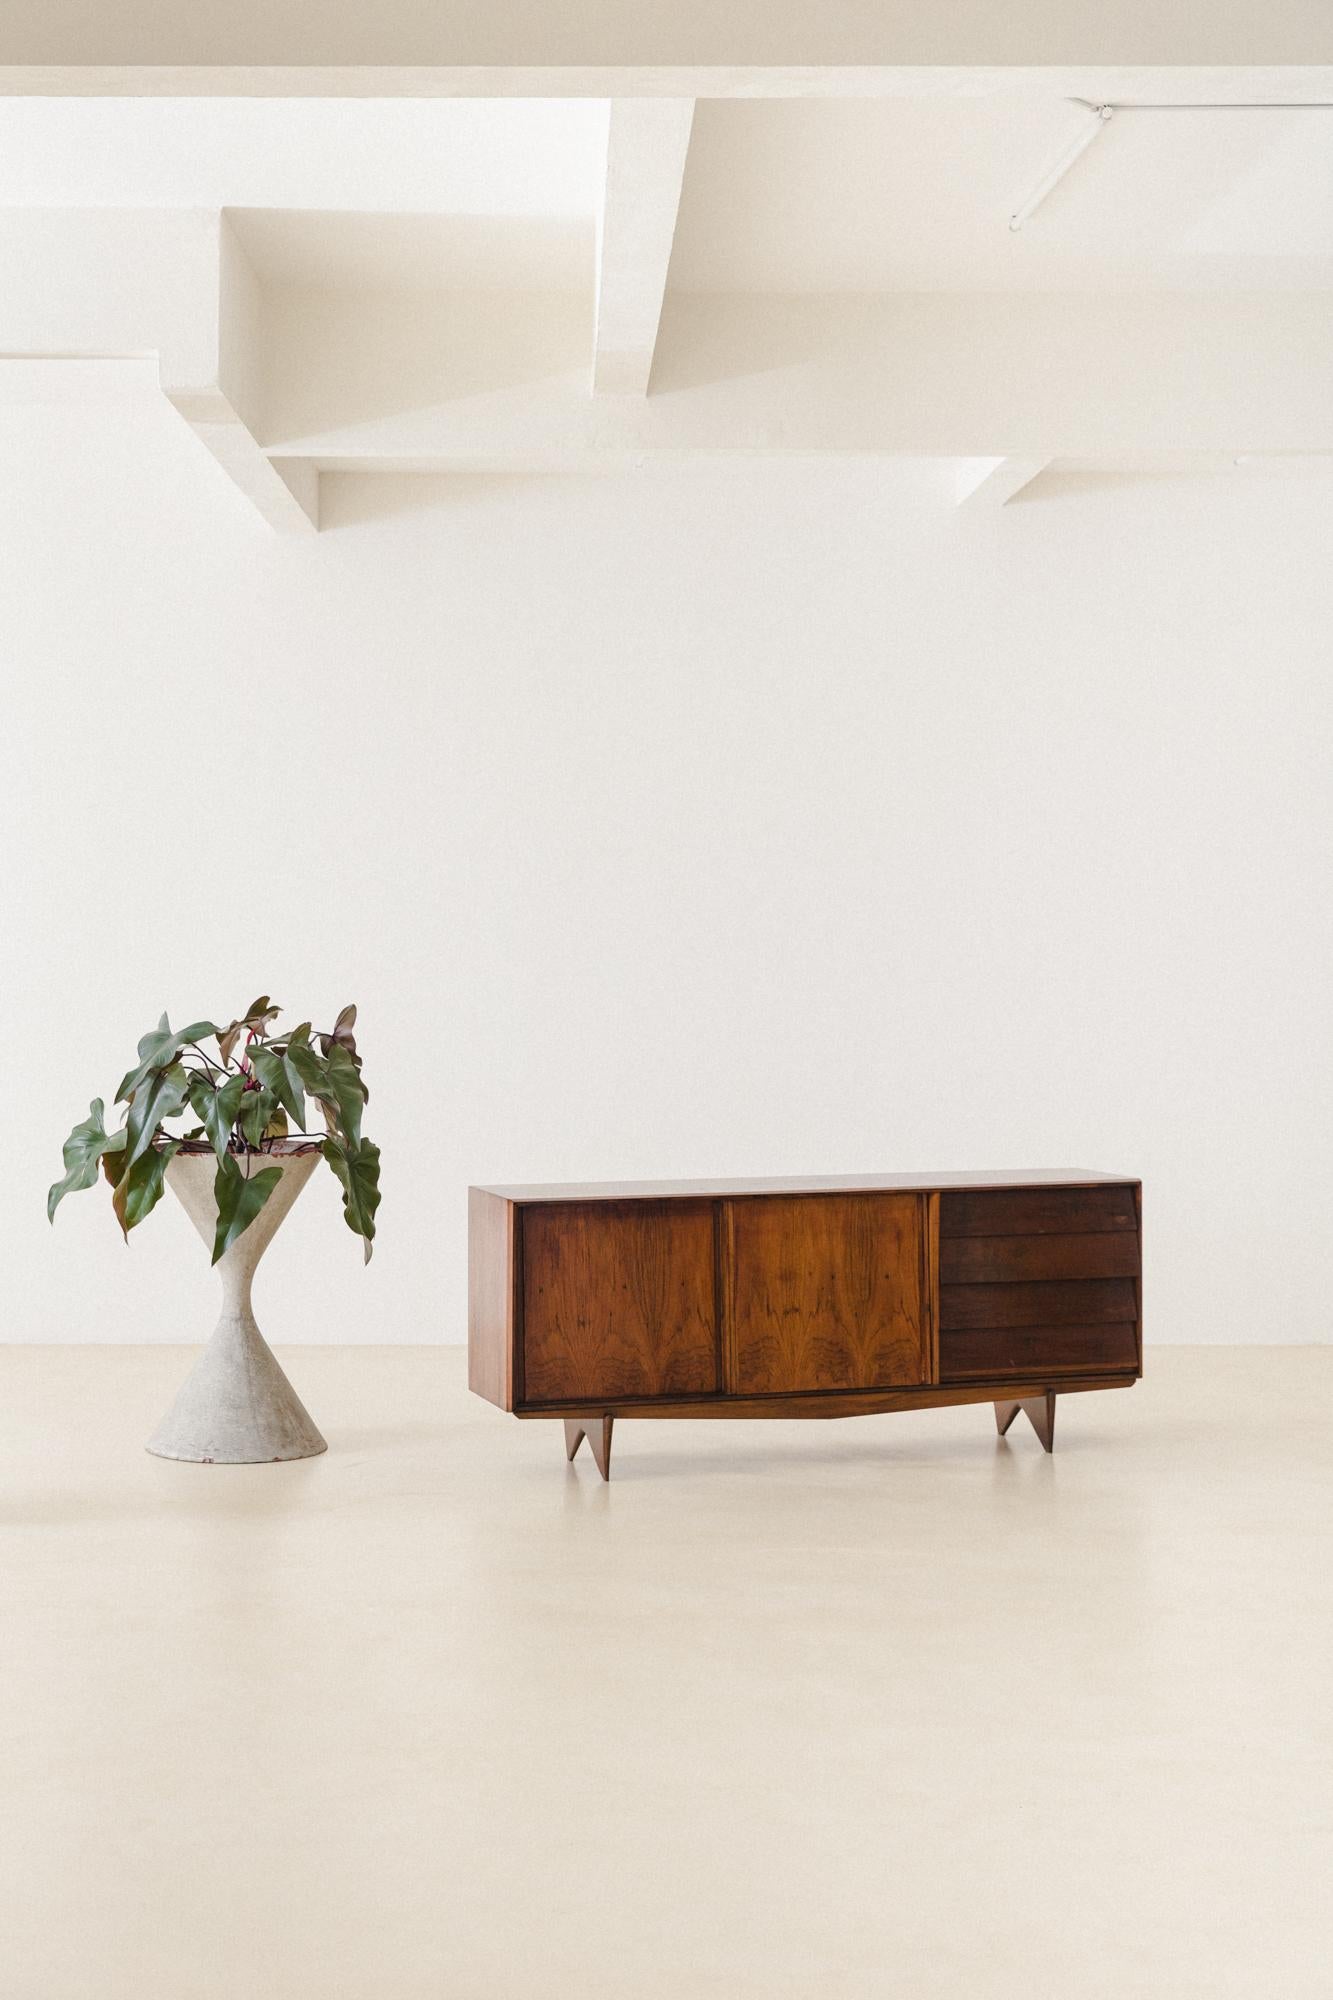 This Caviuna Credenza was designed by Martin Eisler (1913-1977) for Forma S.A. Móveis e Objetos de Arte in the 1950s.

This furniture typology was very common at the period, appearing in several interior projects published in the most known design